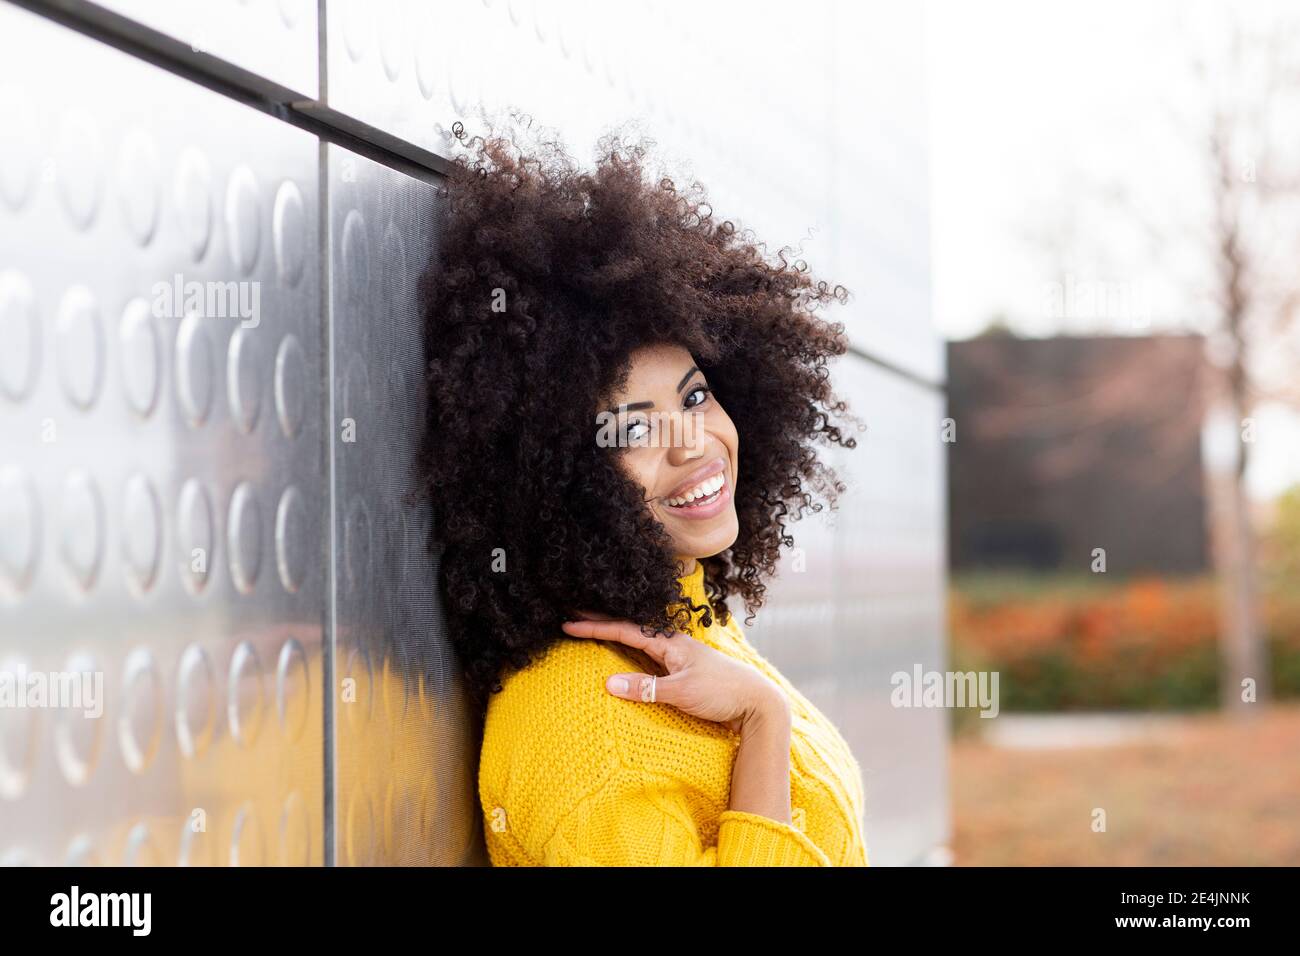 Curly hair woman smiling while leaning on silver wall Stock Photo